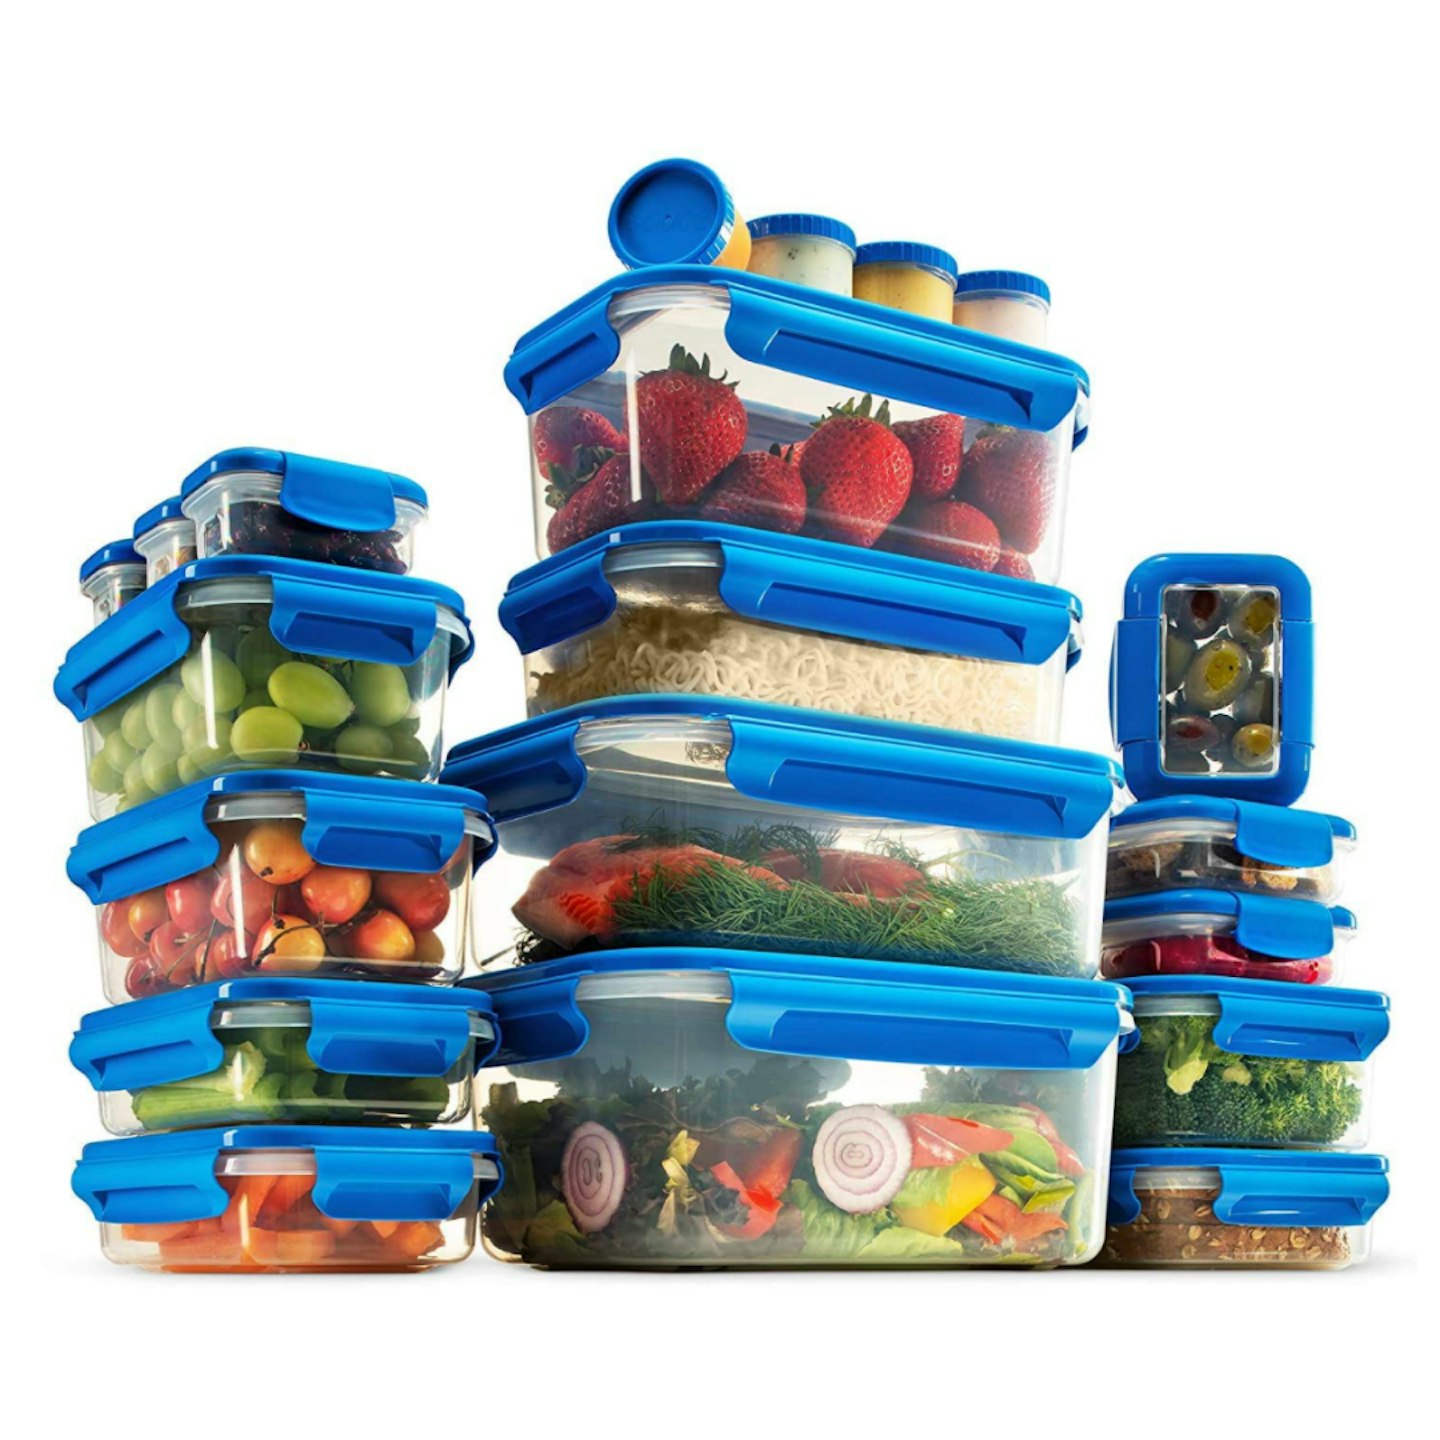 https://images.bauerhosting.com/legacy/media/6201/57e3/05e8/55ed/2f9c/35a4/40-Piece-Airtight-Food-Containers-With-Lids.png?auto=format&w=1440&q=80